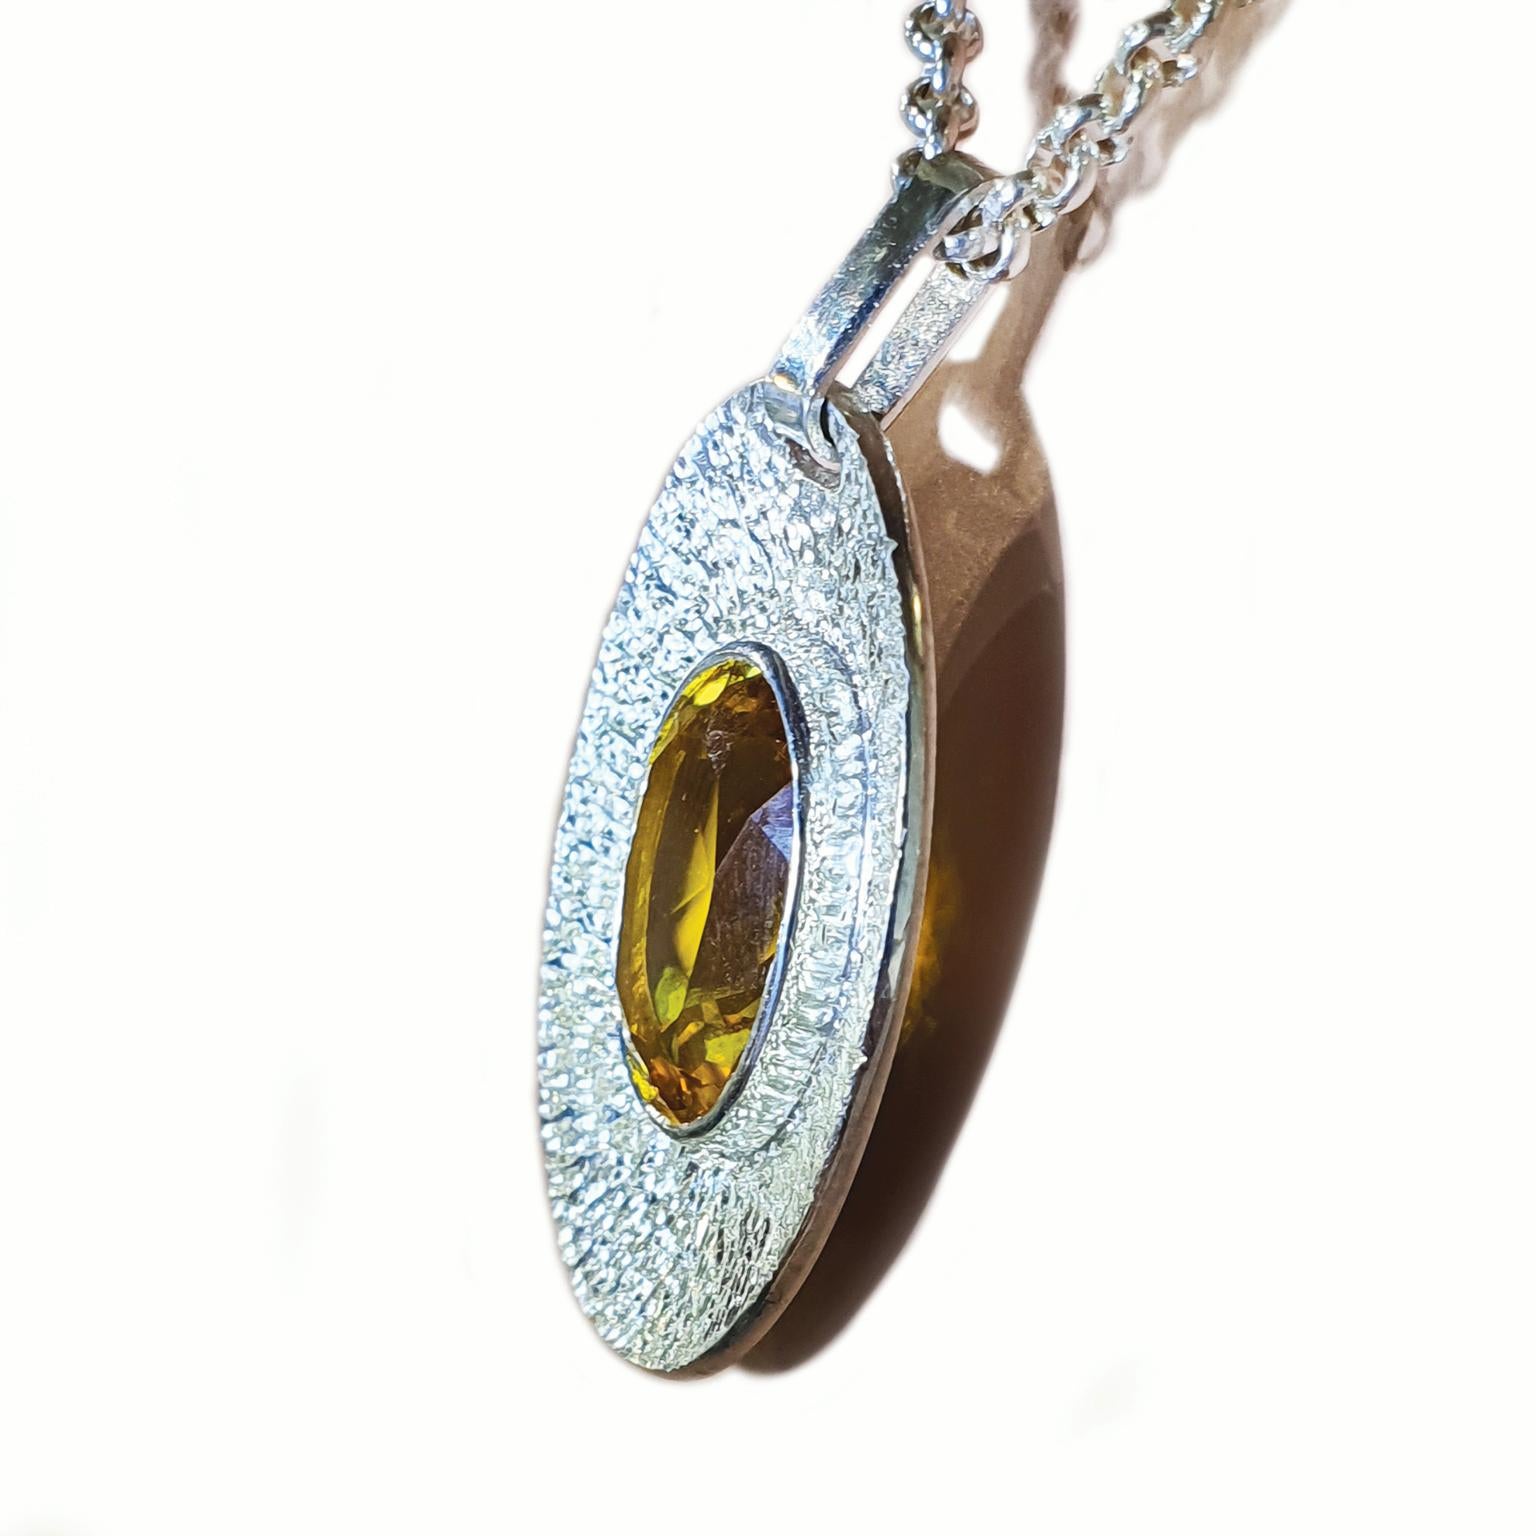 Artisan Paul Amey Hand Crafted Yellow Oval Pendant For Sale